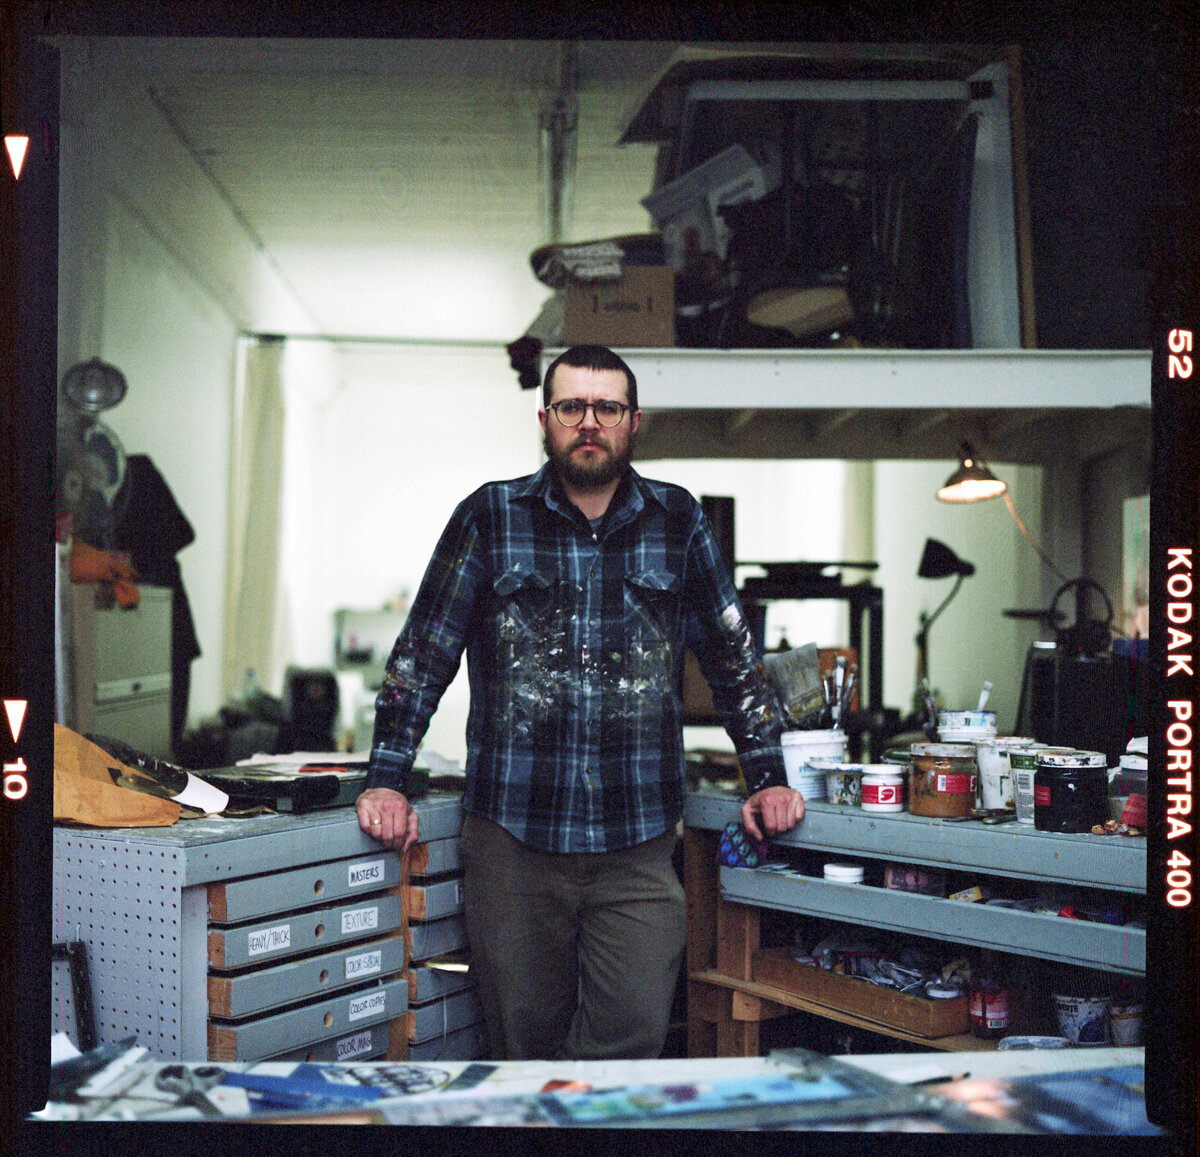 Visually impaired mixed media artist Gavin Sewell stands surrounded by his supplies of collage papers, paints, and brushes in his Montréal studio.